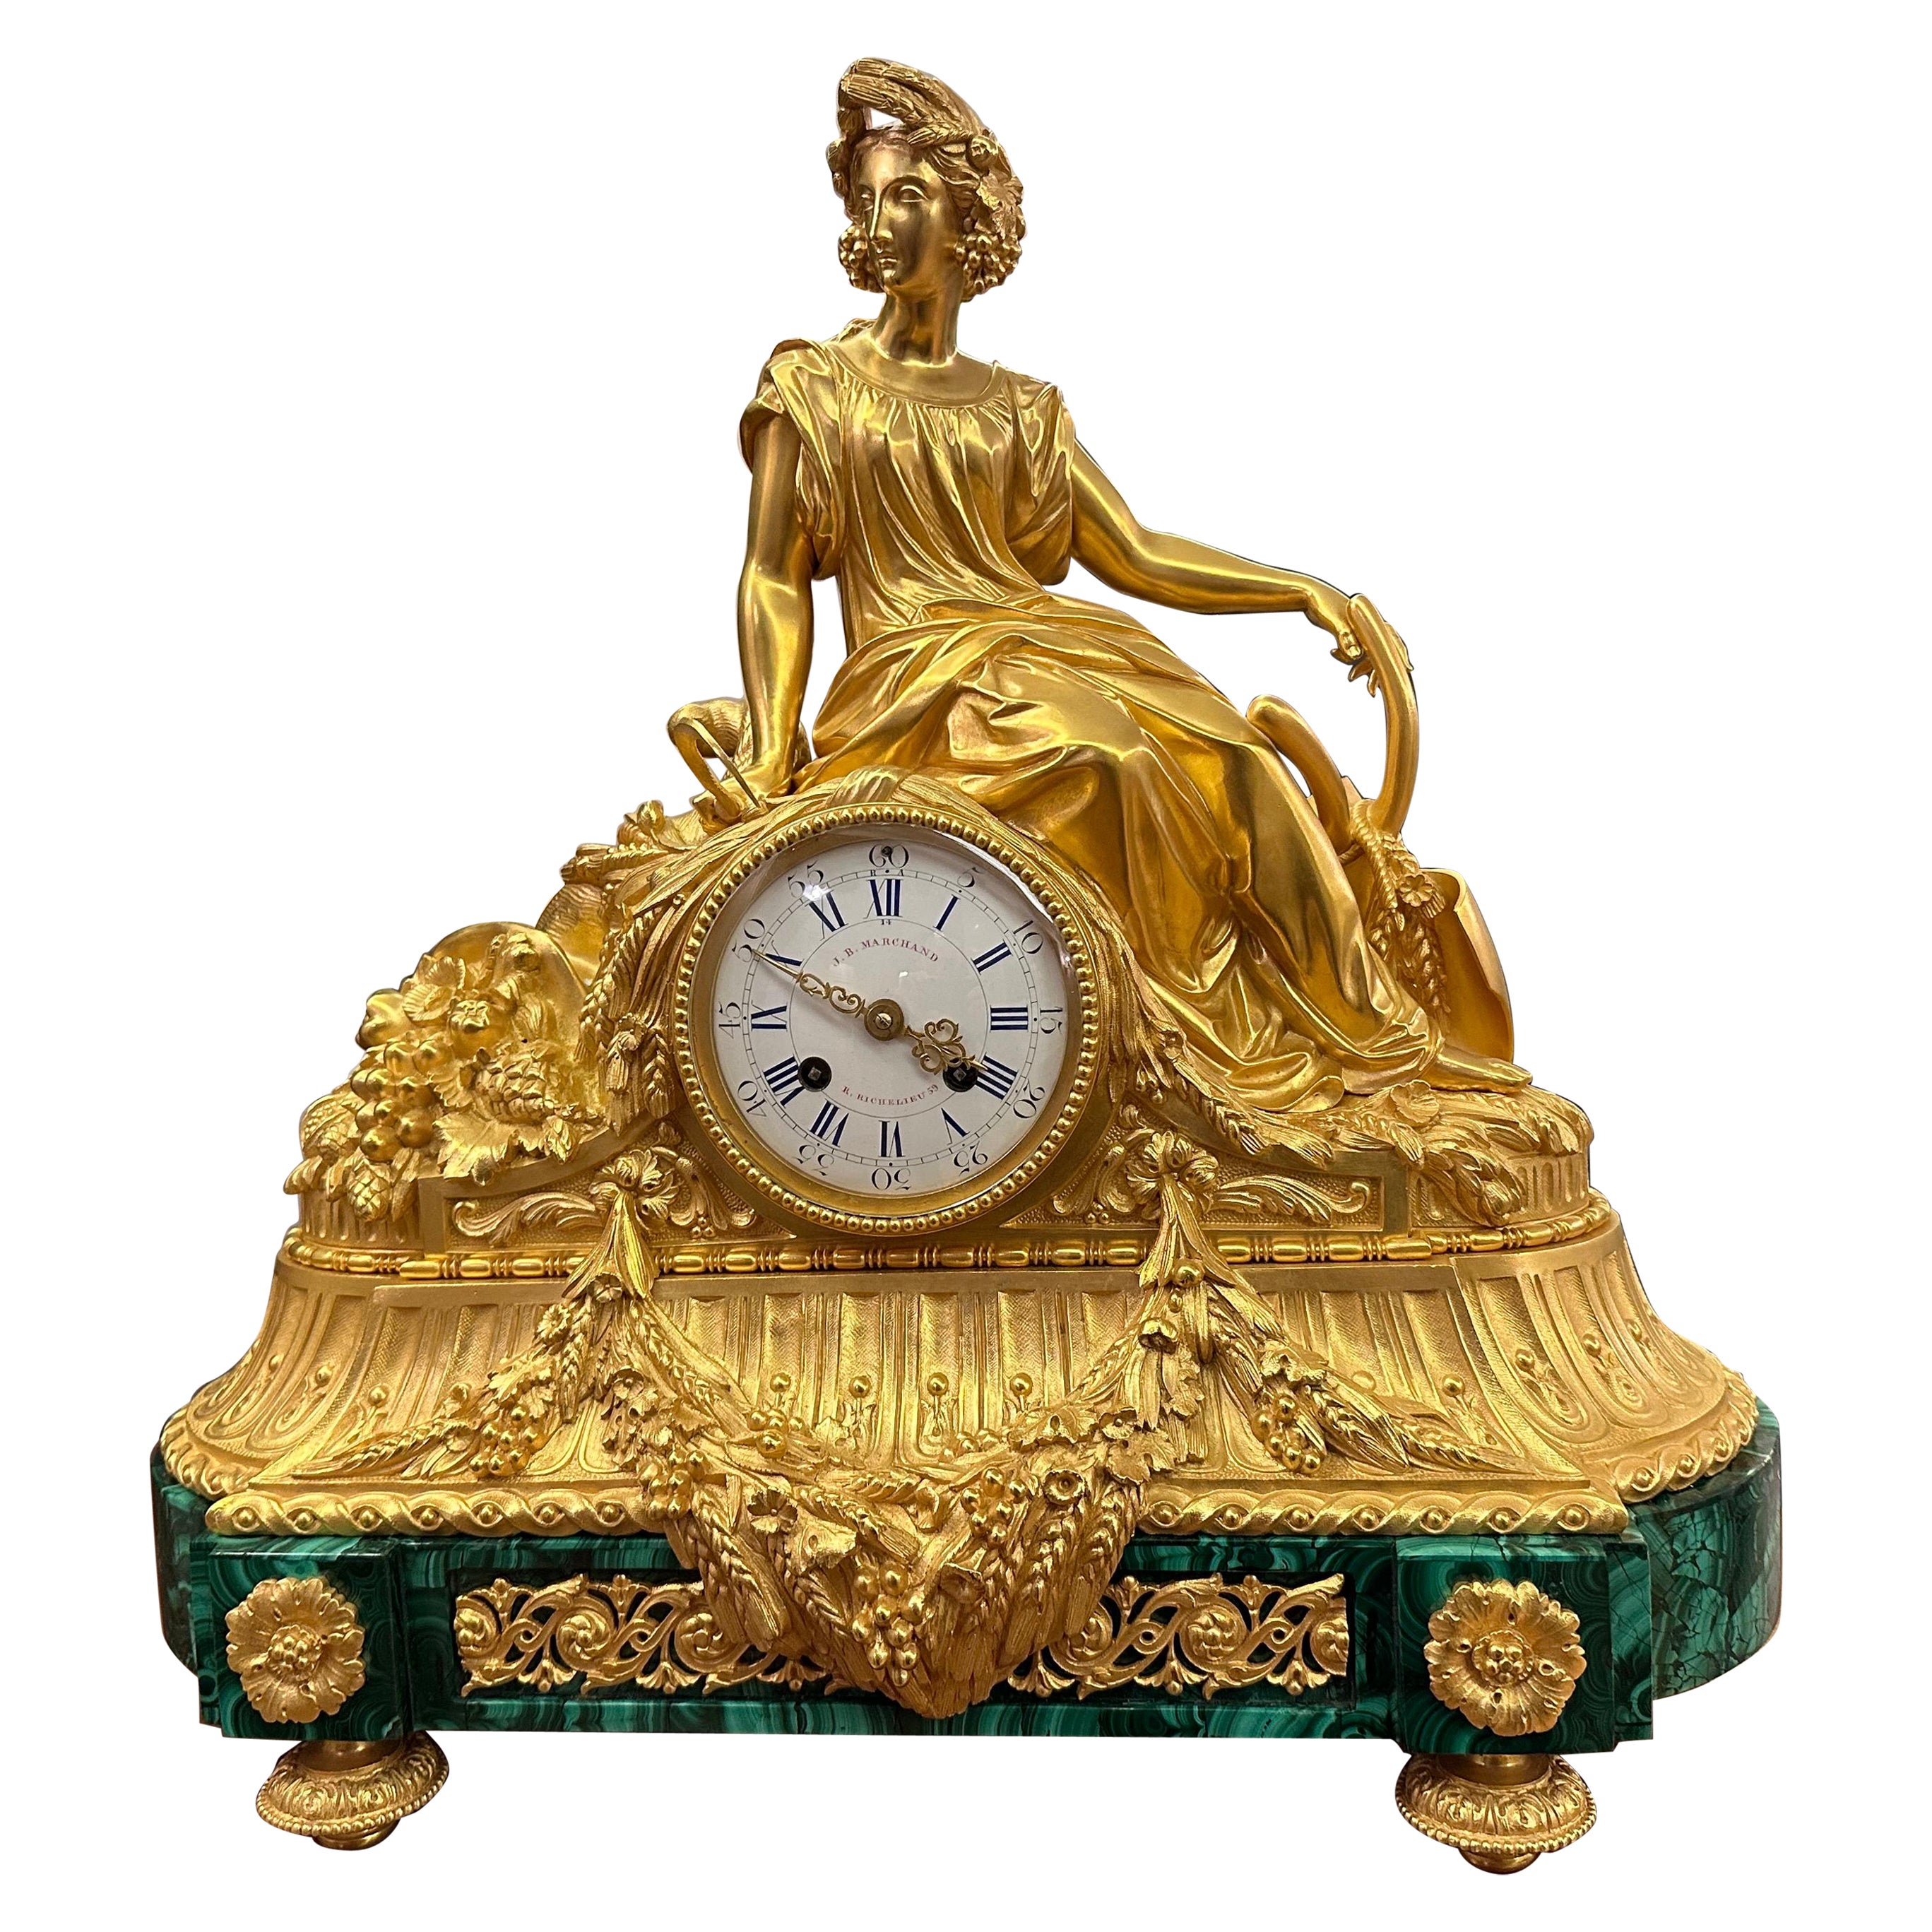 A beautiful clock from the time of Napoleon III in gilded bronze and a uniquely colored malachite base.

Details of the movement mechanism: Eight days there is a pendulum hanging. He struck an hour and a half on the bell. The clock is working great